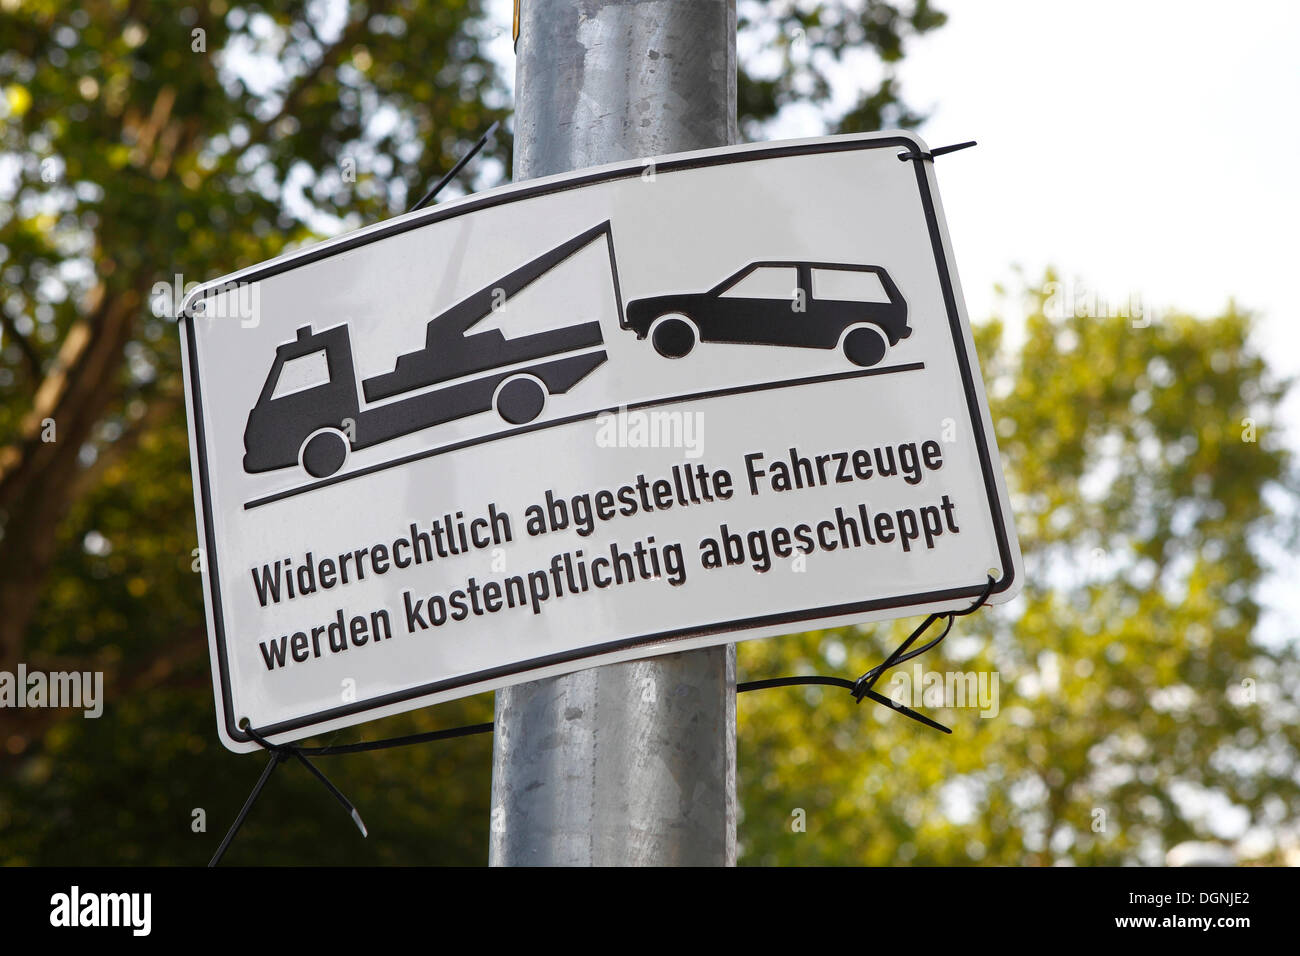 Temporarily attached sign in German for a tow-away zone, Germany Stock Photo